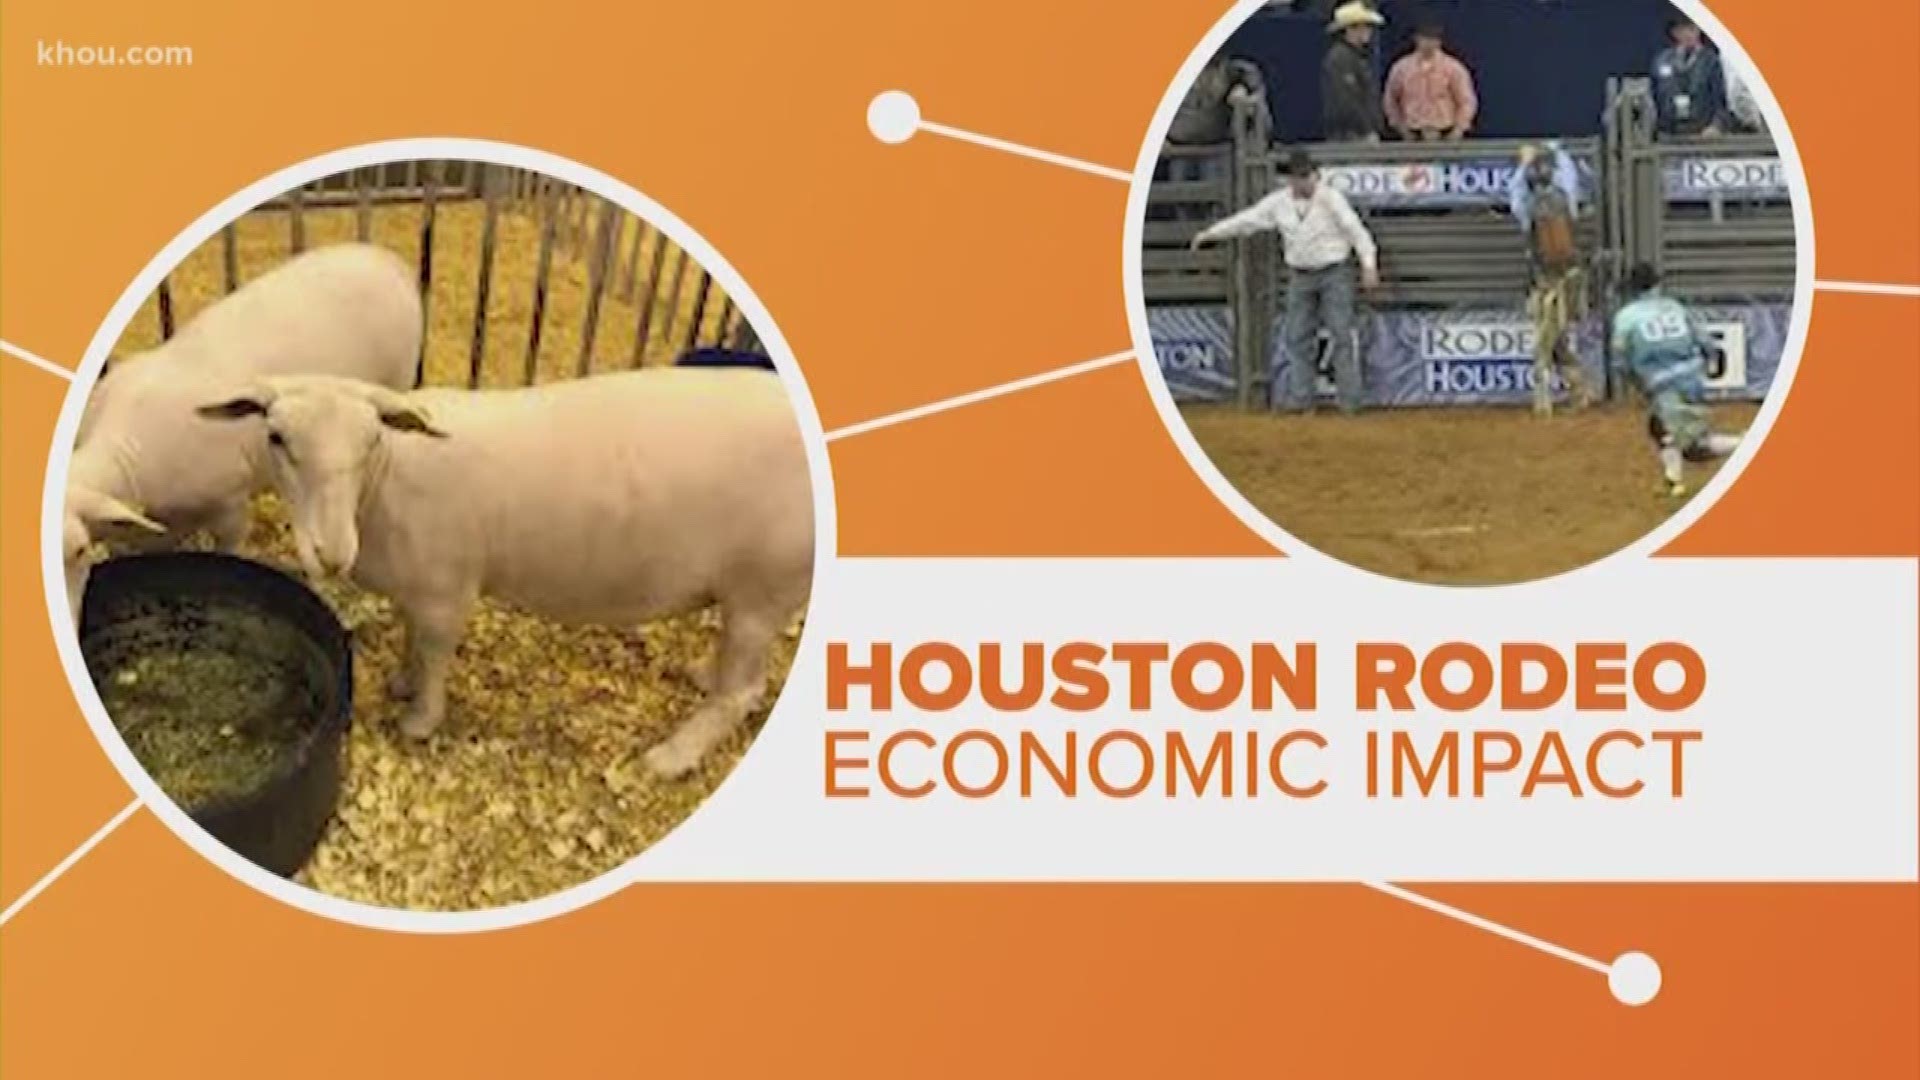 Rodeo season is upon us. But just how big of an impact does rodeo have on Houston?